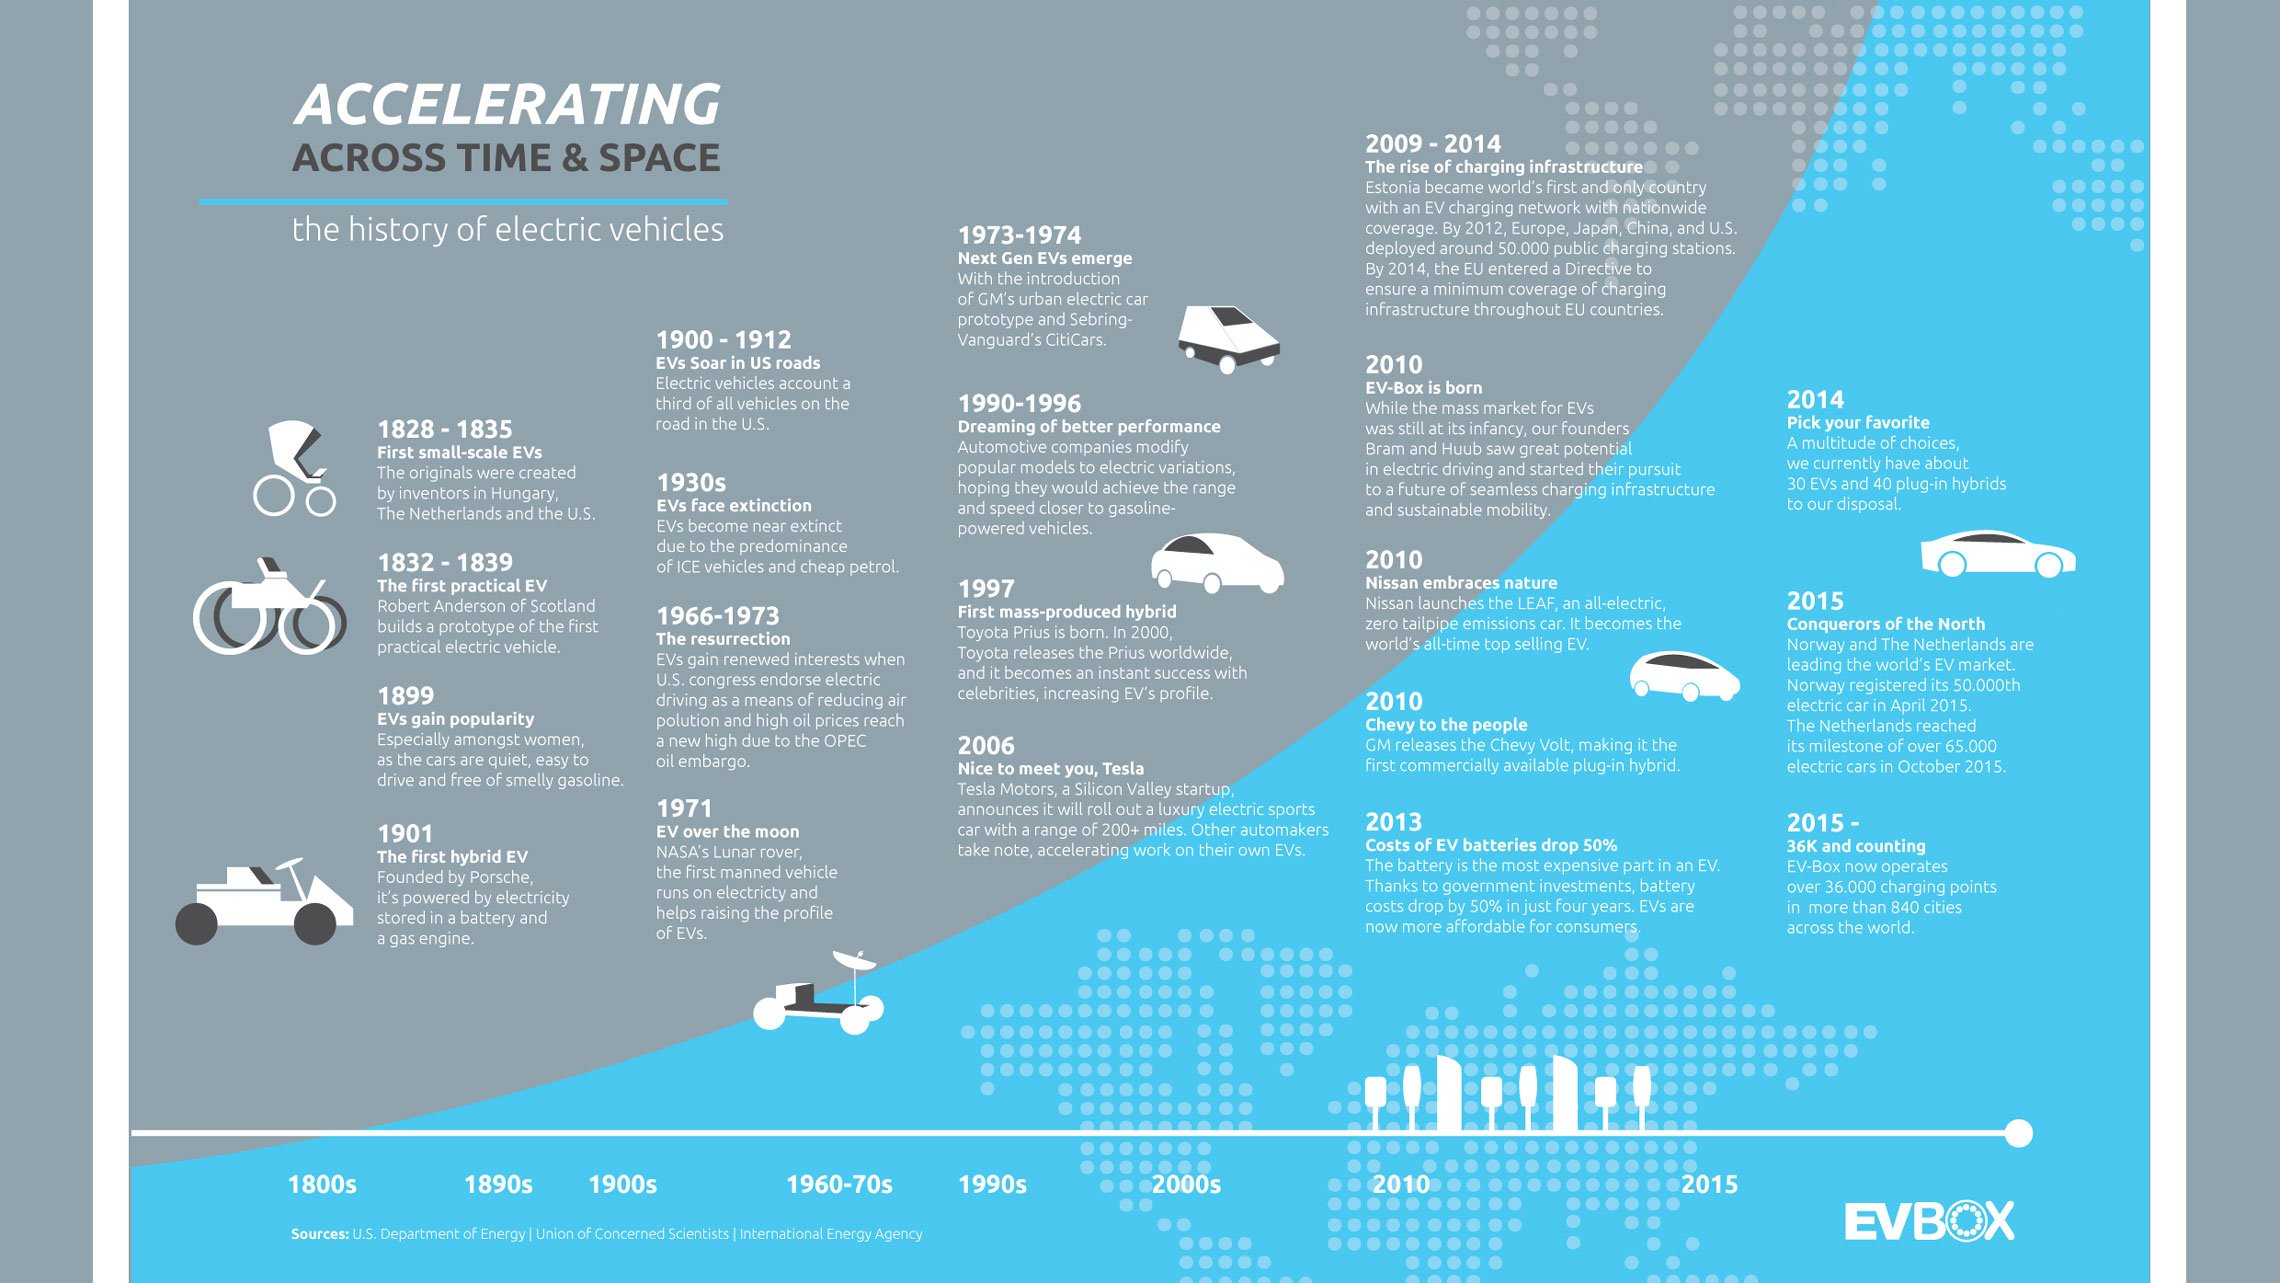 The history of electric cars